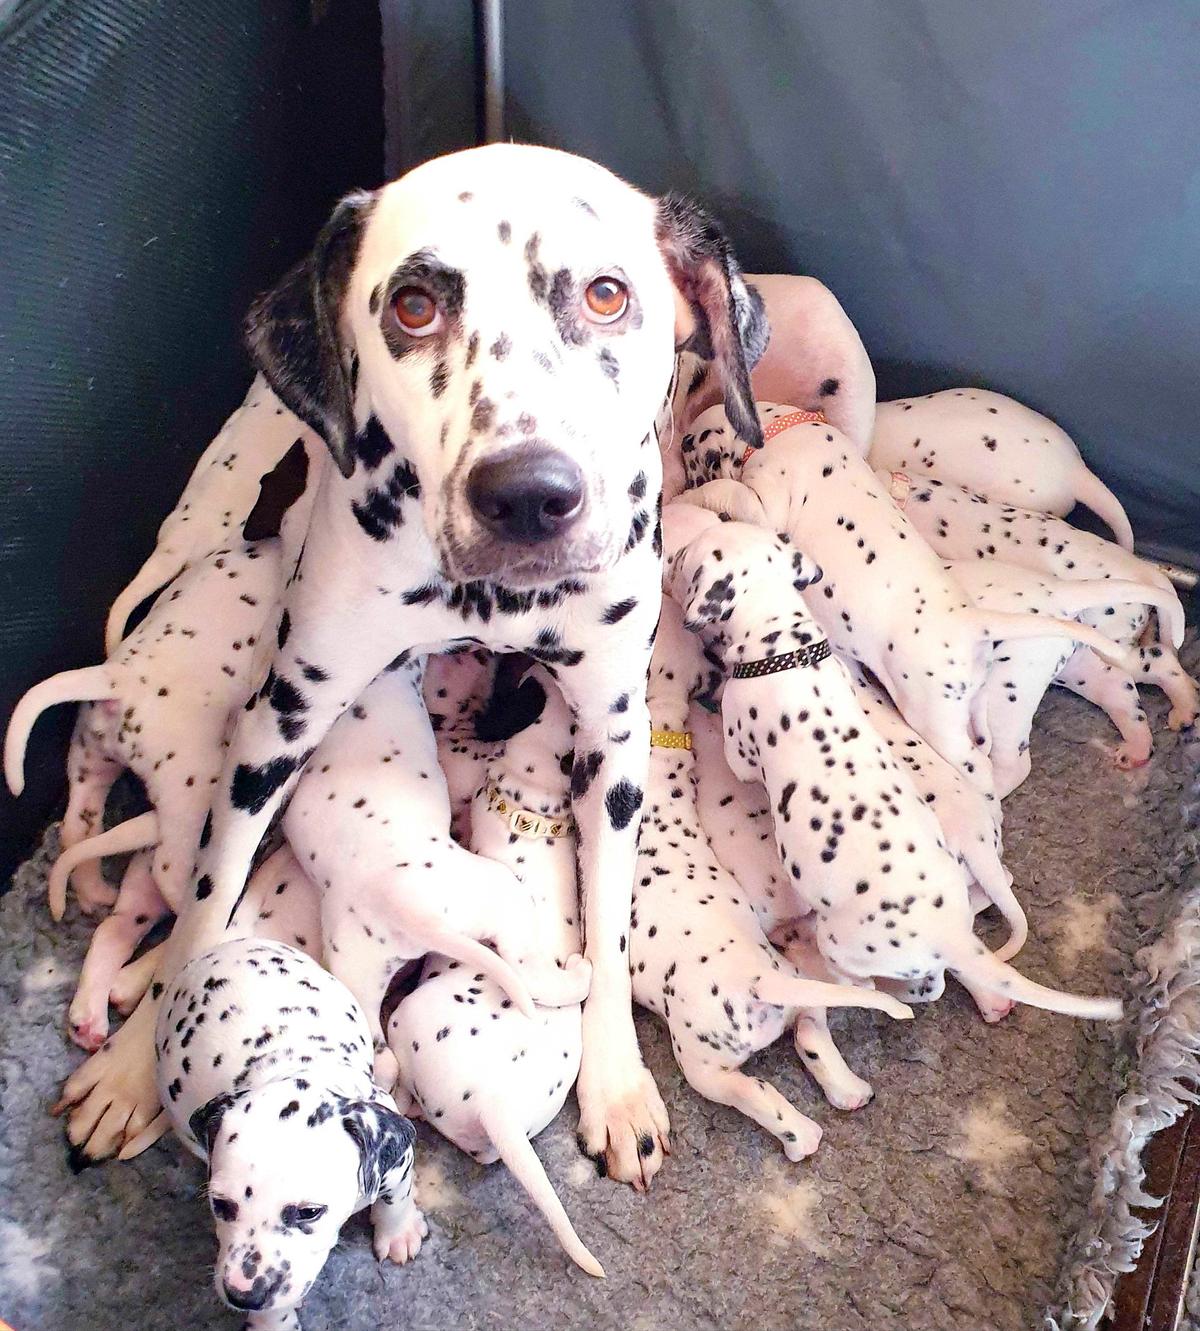 Nellie with her litter of 18 puppies. (Caters News)